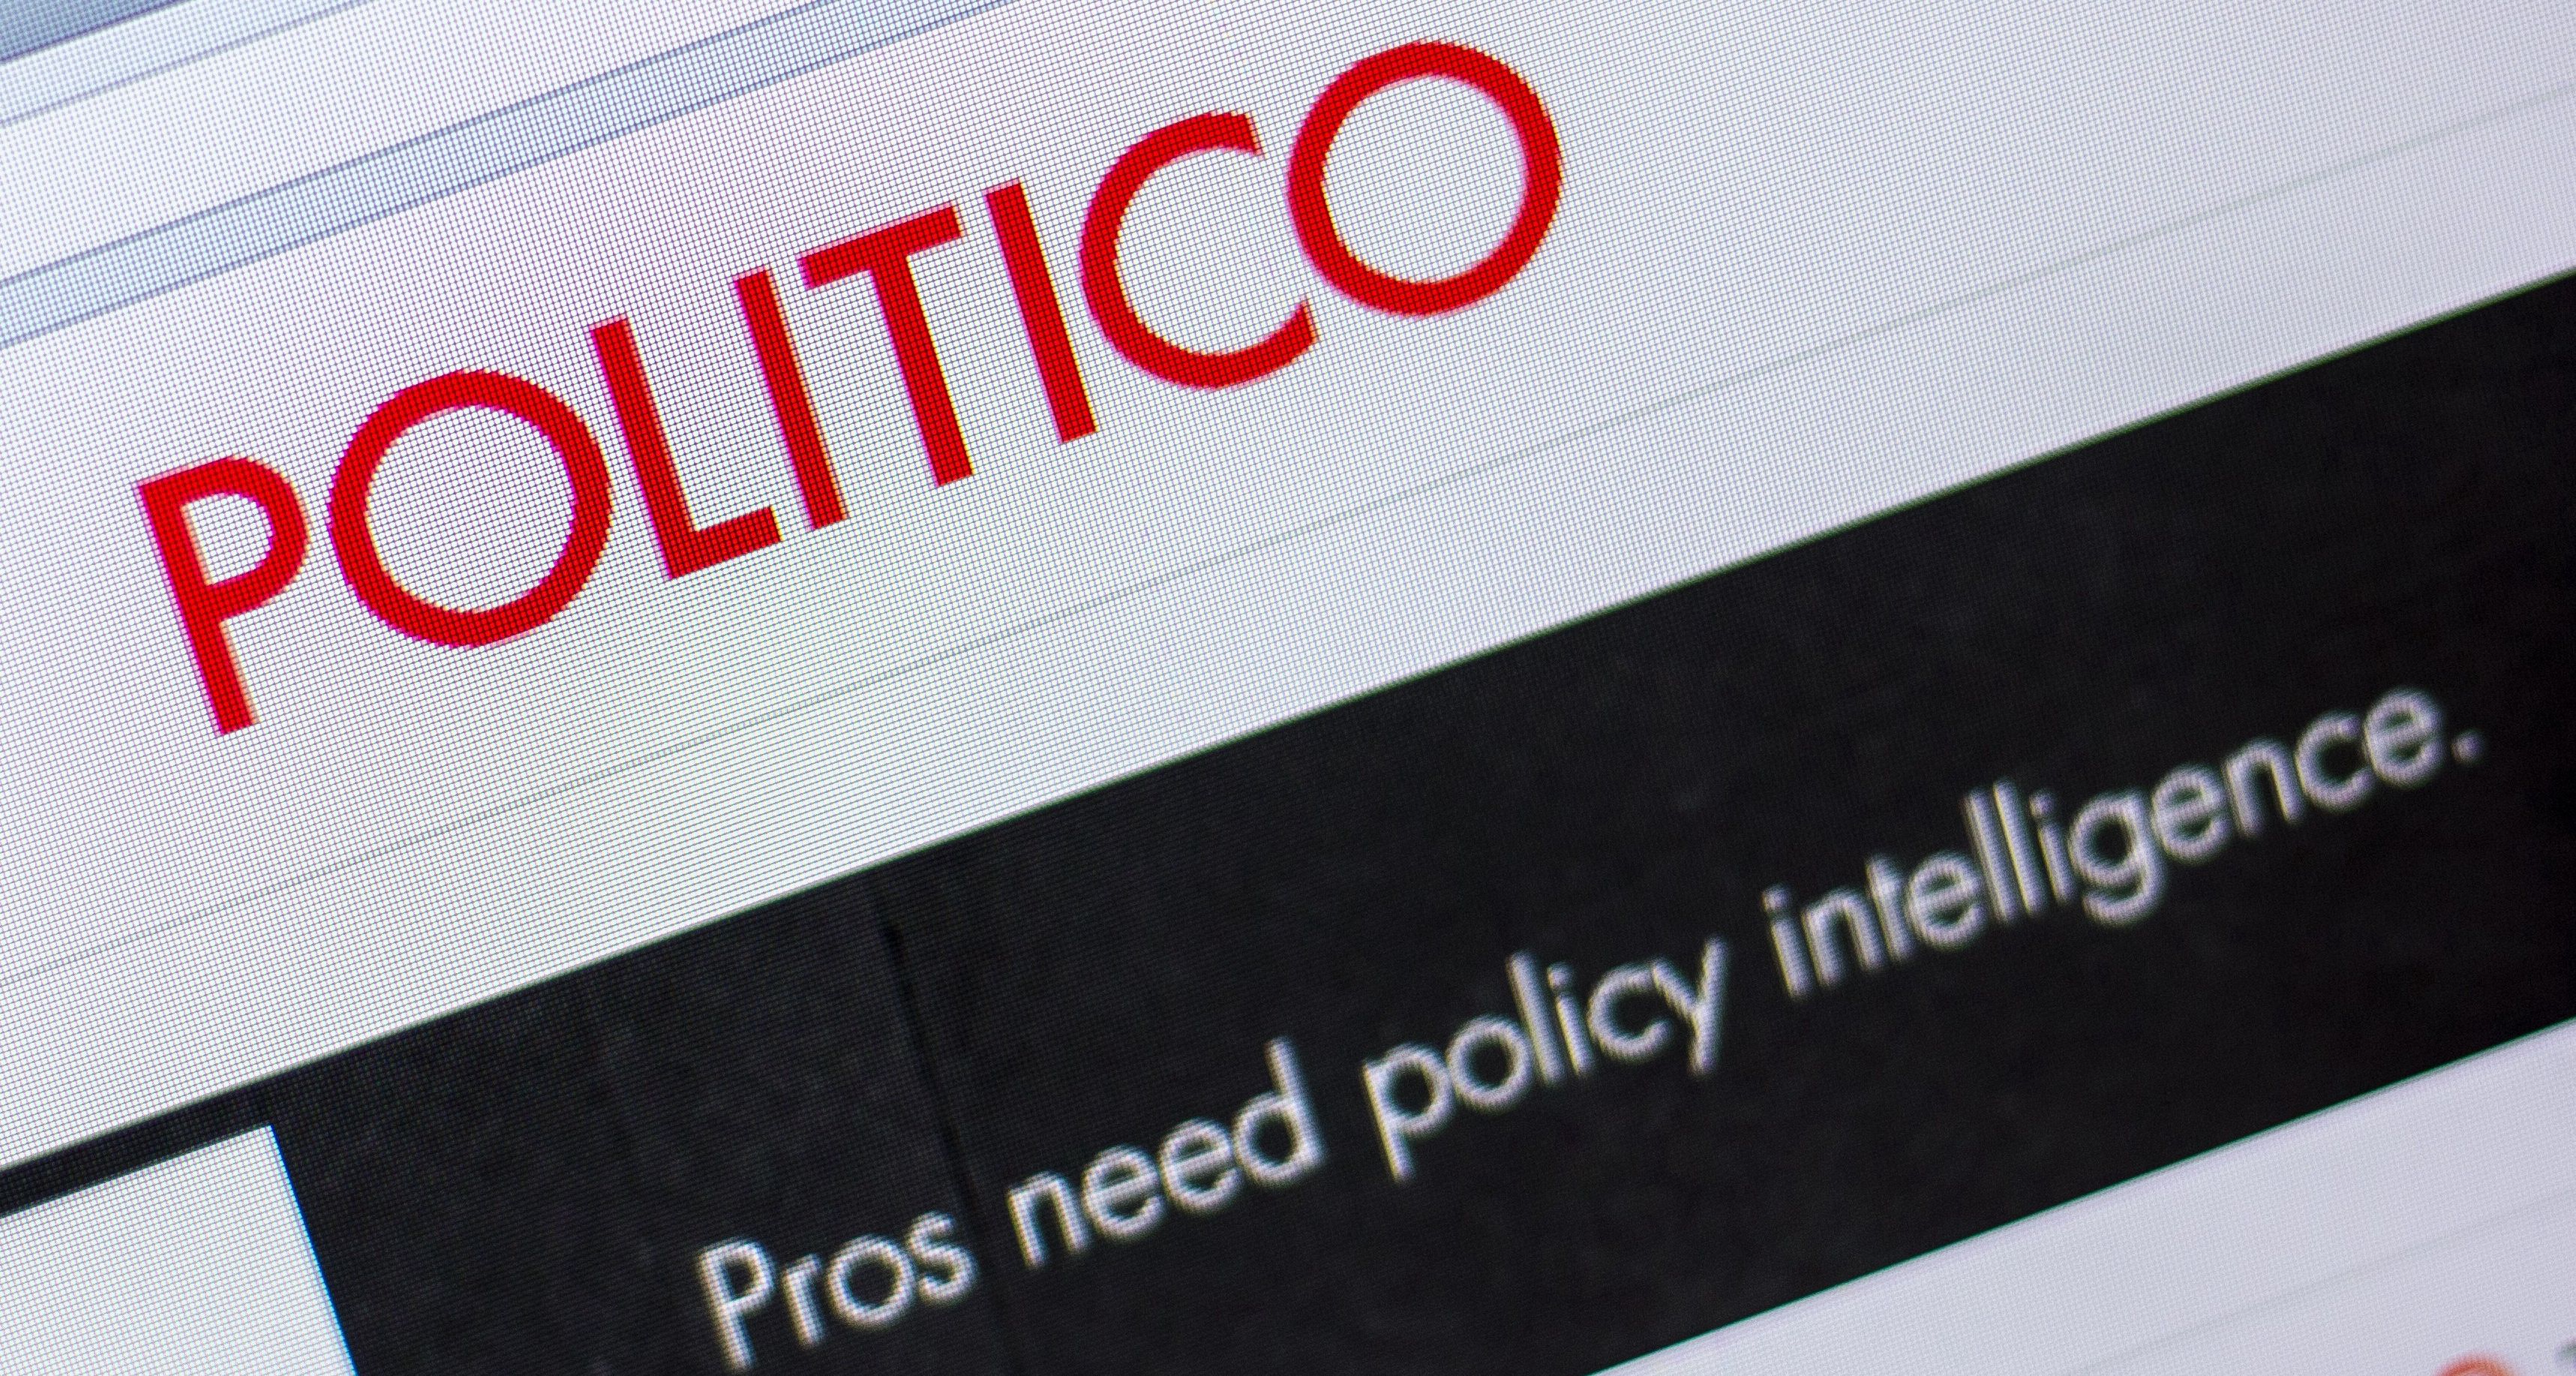 Pentagon enlists Politico to amplify funding woes claim | Responsible ...